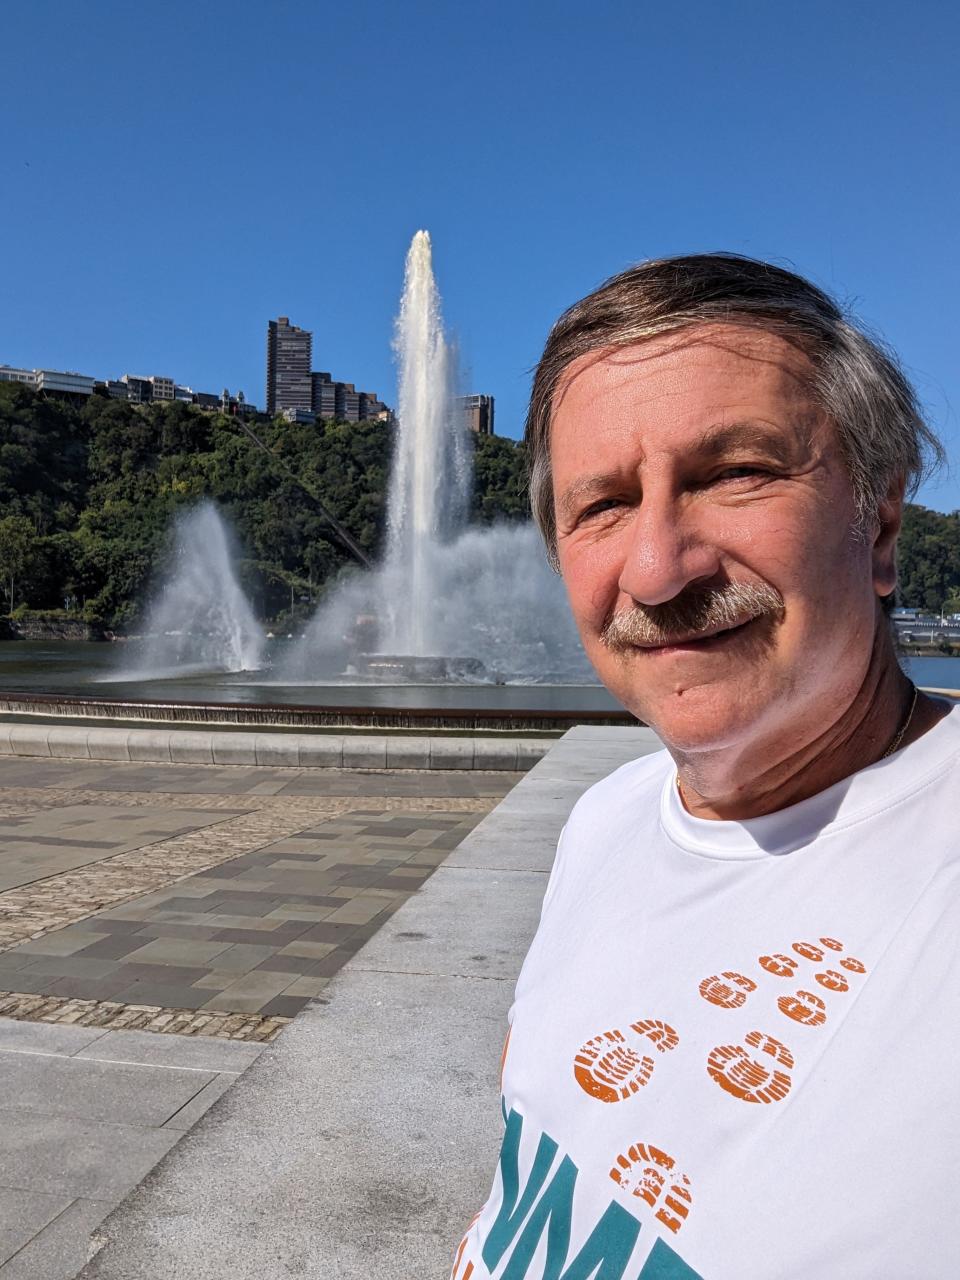 Walking a minimum of a 5K a day, Pete Denardis is hoping to raise support for the International Waldenstrom’s Macroglobulinemia Foundation (IWMF) and increase awareness of Waldenstrom macroglobulinemia.